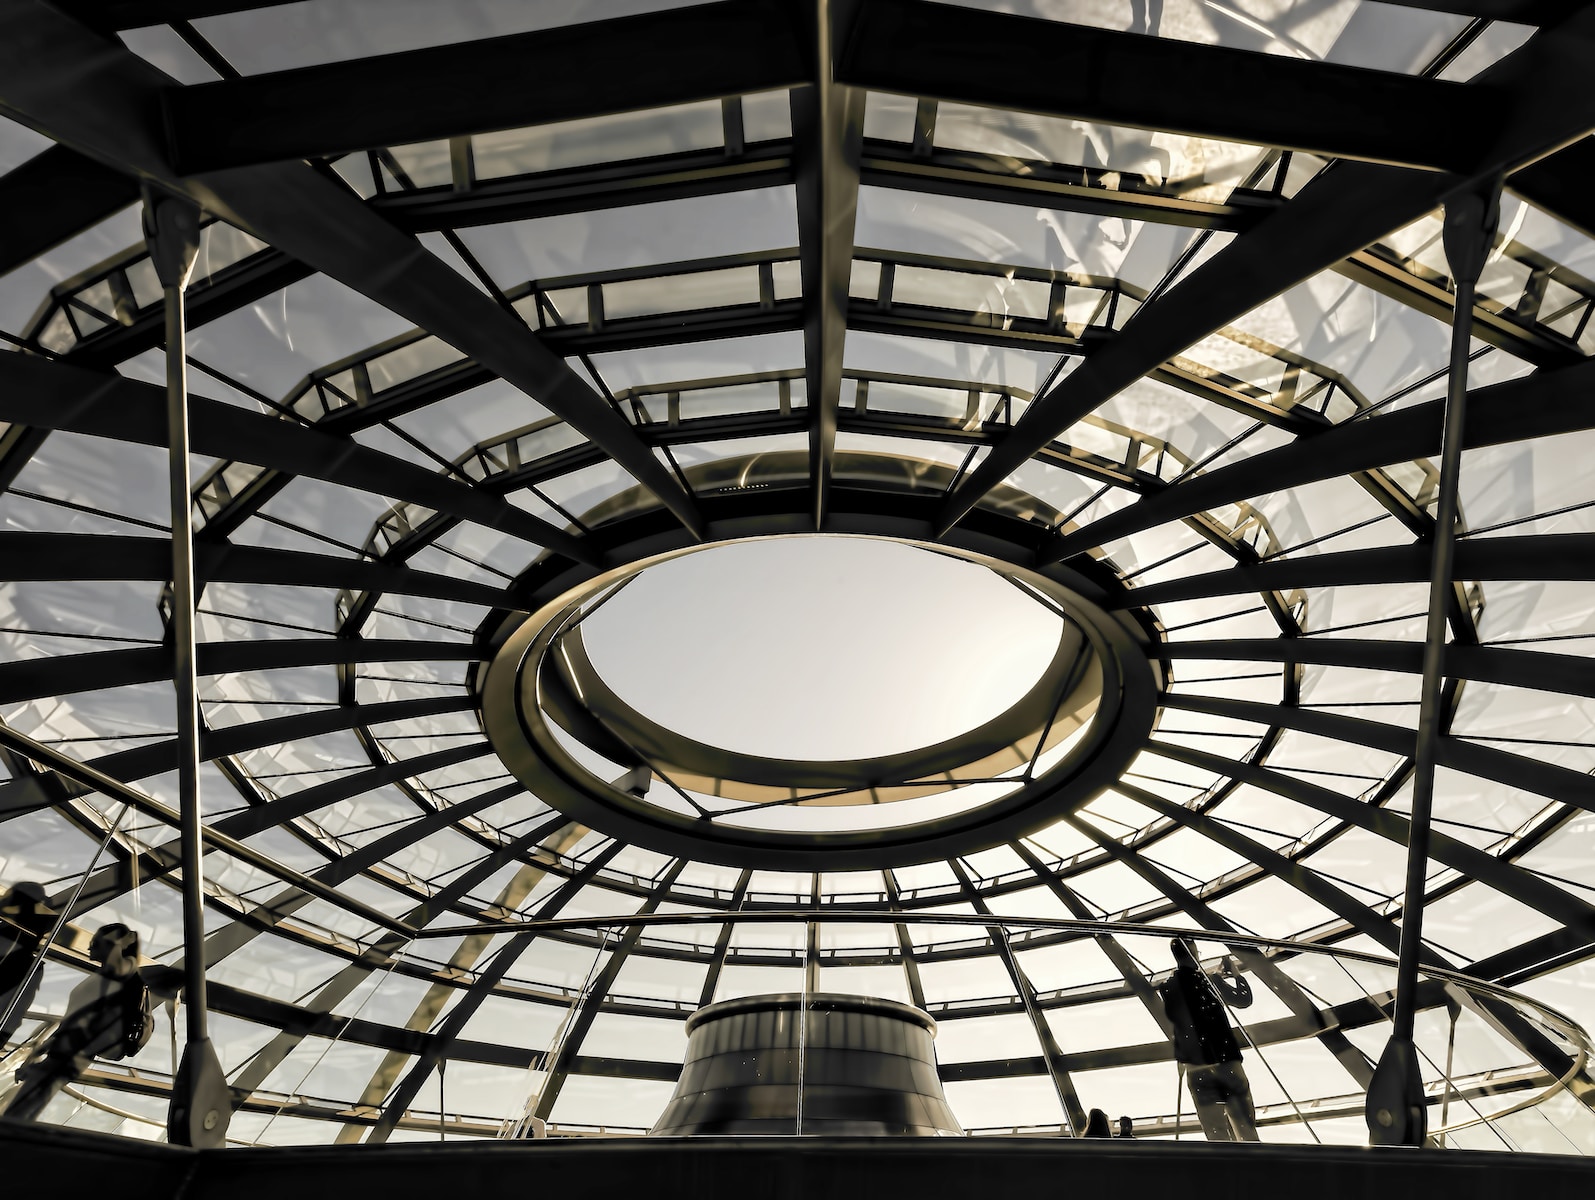 LobbyingData.com - photograph of a government building with a glass ceiling, appealing to transparency. In the photo, there are people standing under clear glass ceiling